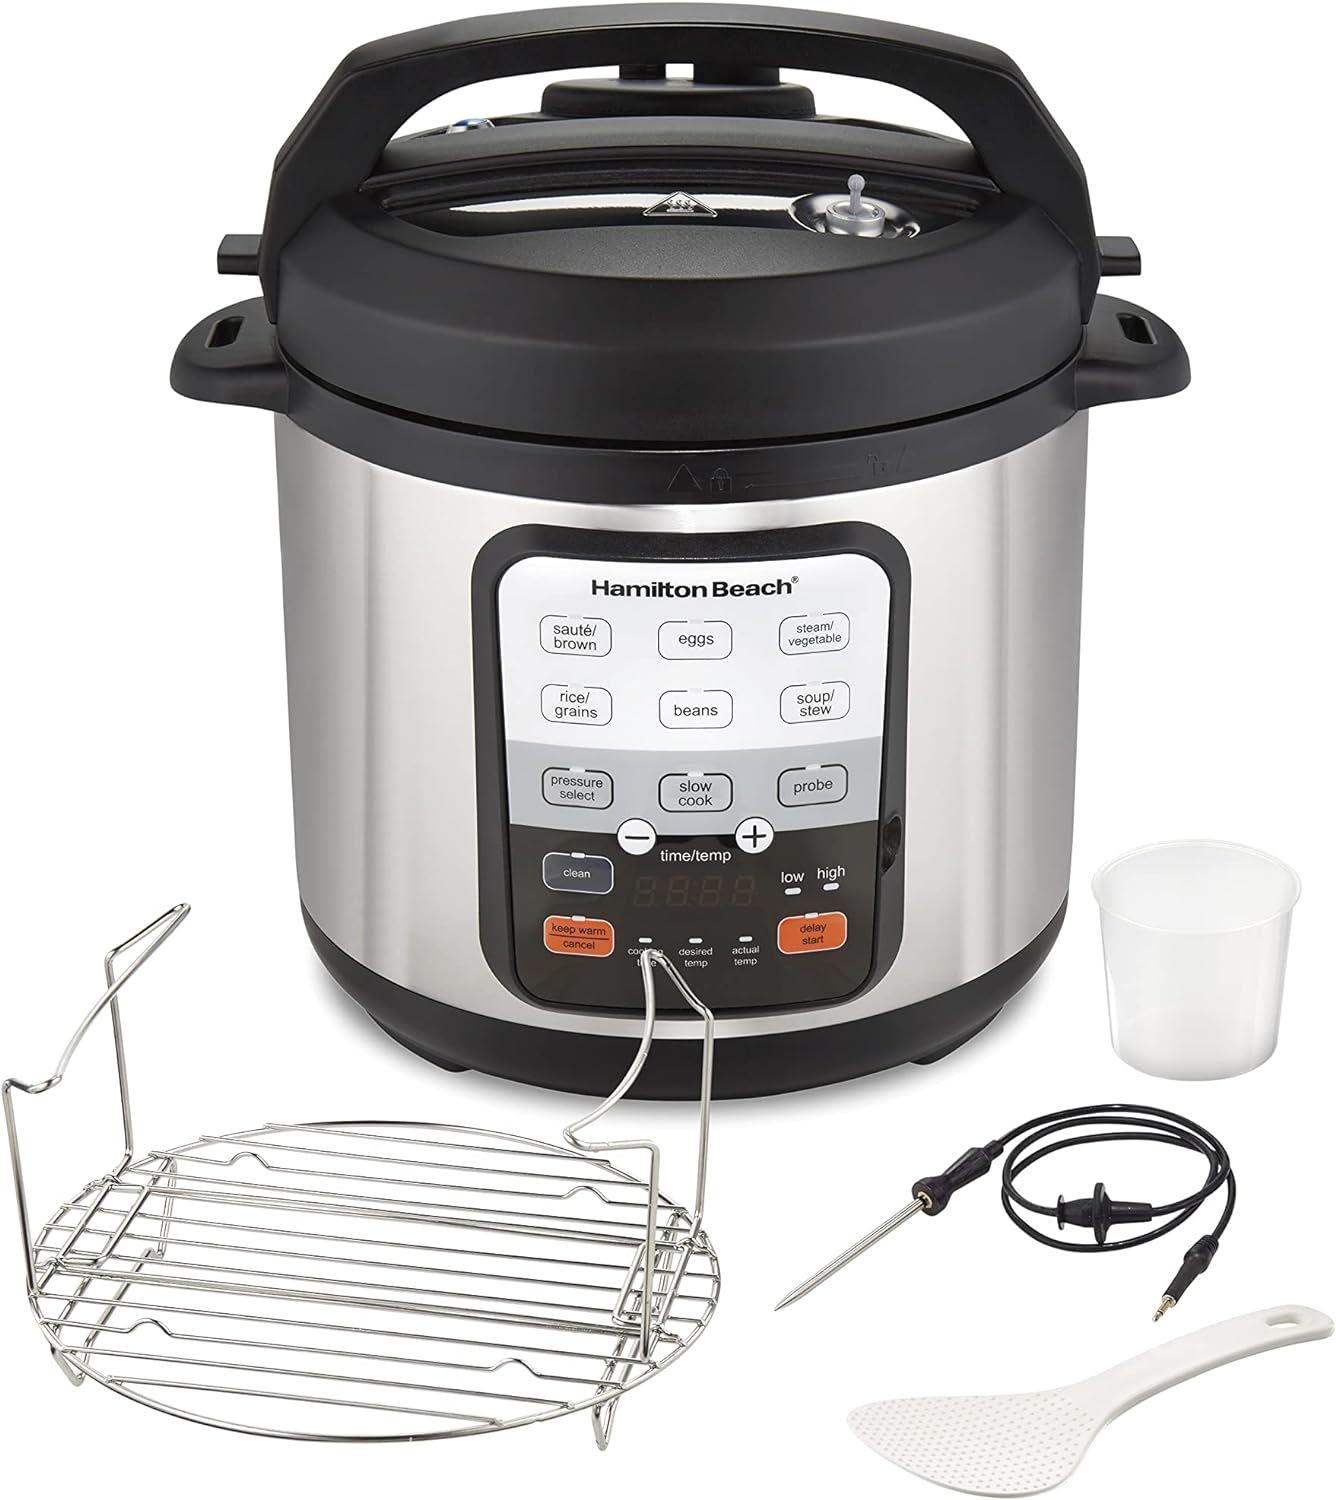 Hamilton Beach 6-in-1 Precision Electric Pressure Cooker with Temperature Probe, Slow Cooks, Sautés, Browns, Steams, Rice Function, 6 Quart Capacity, Stainless Steel (34506)